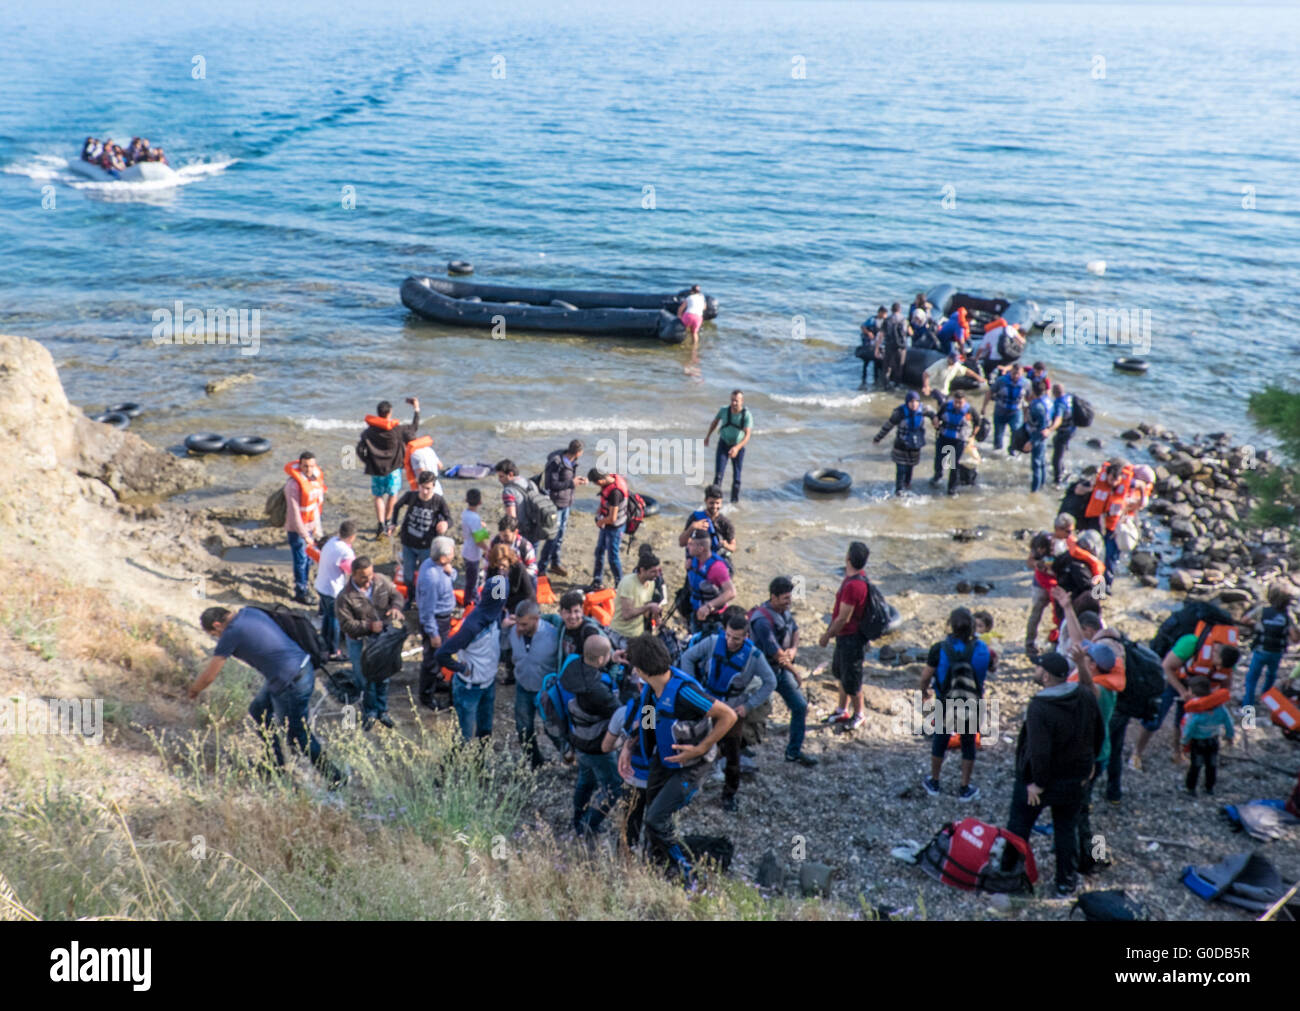 Four rafts of refugees crossing from Turkey to Greece arrive on the northern shore of the Greek island of Lesvos Stock Photo